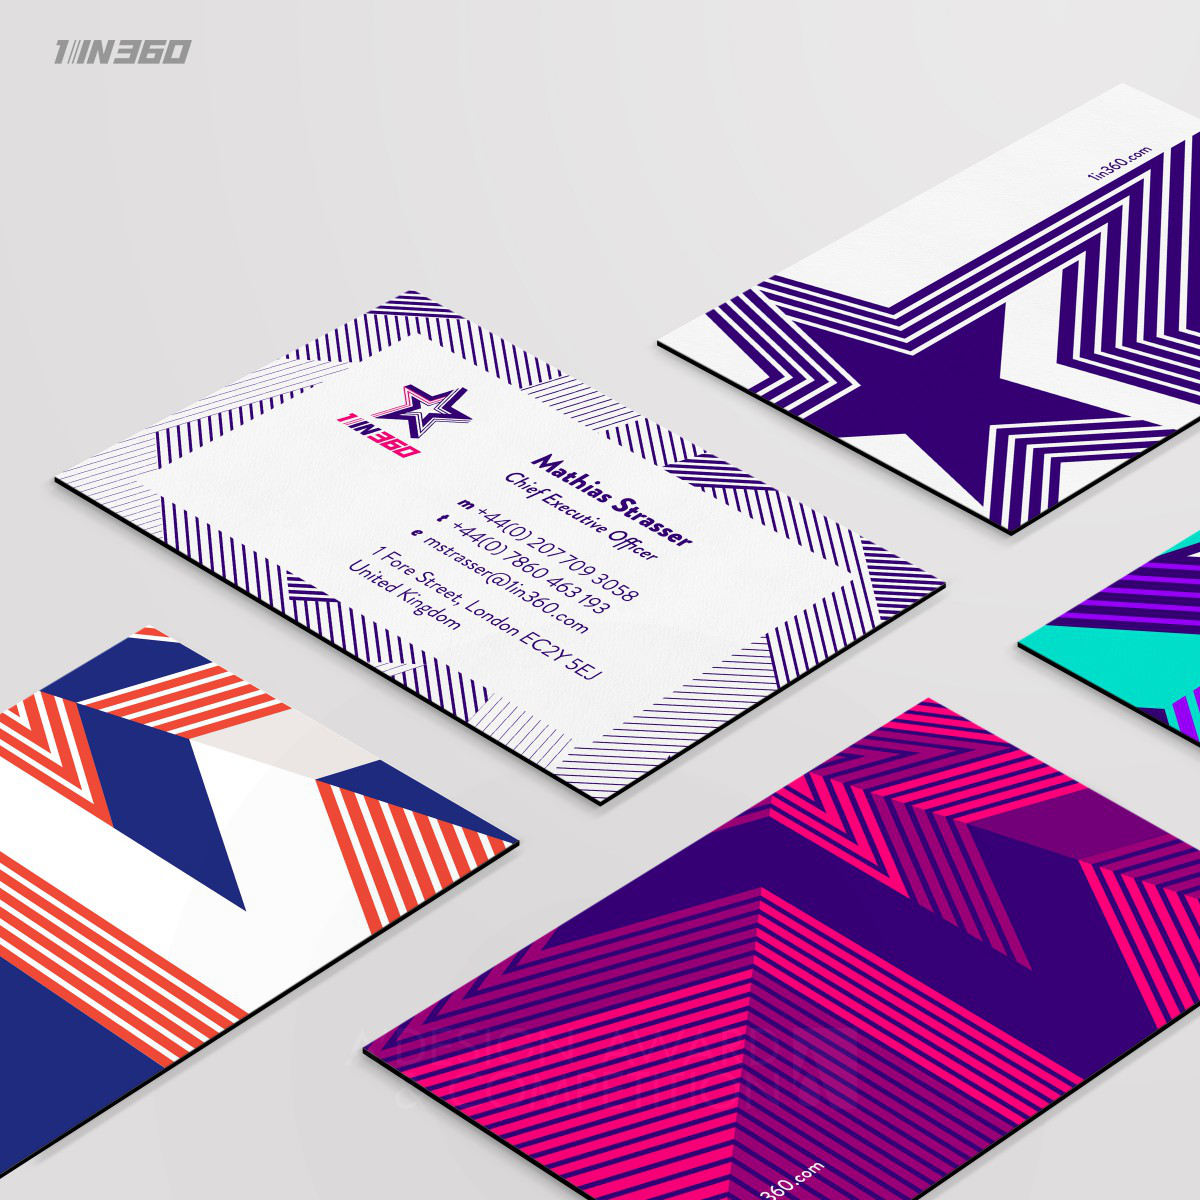 Dongho Kim, Yunyoung Lee  Brand Identity Redesign